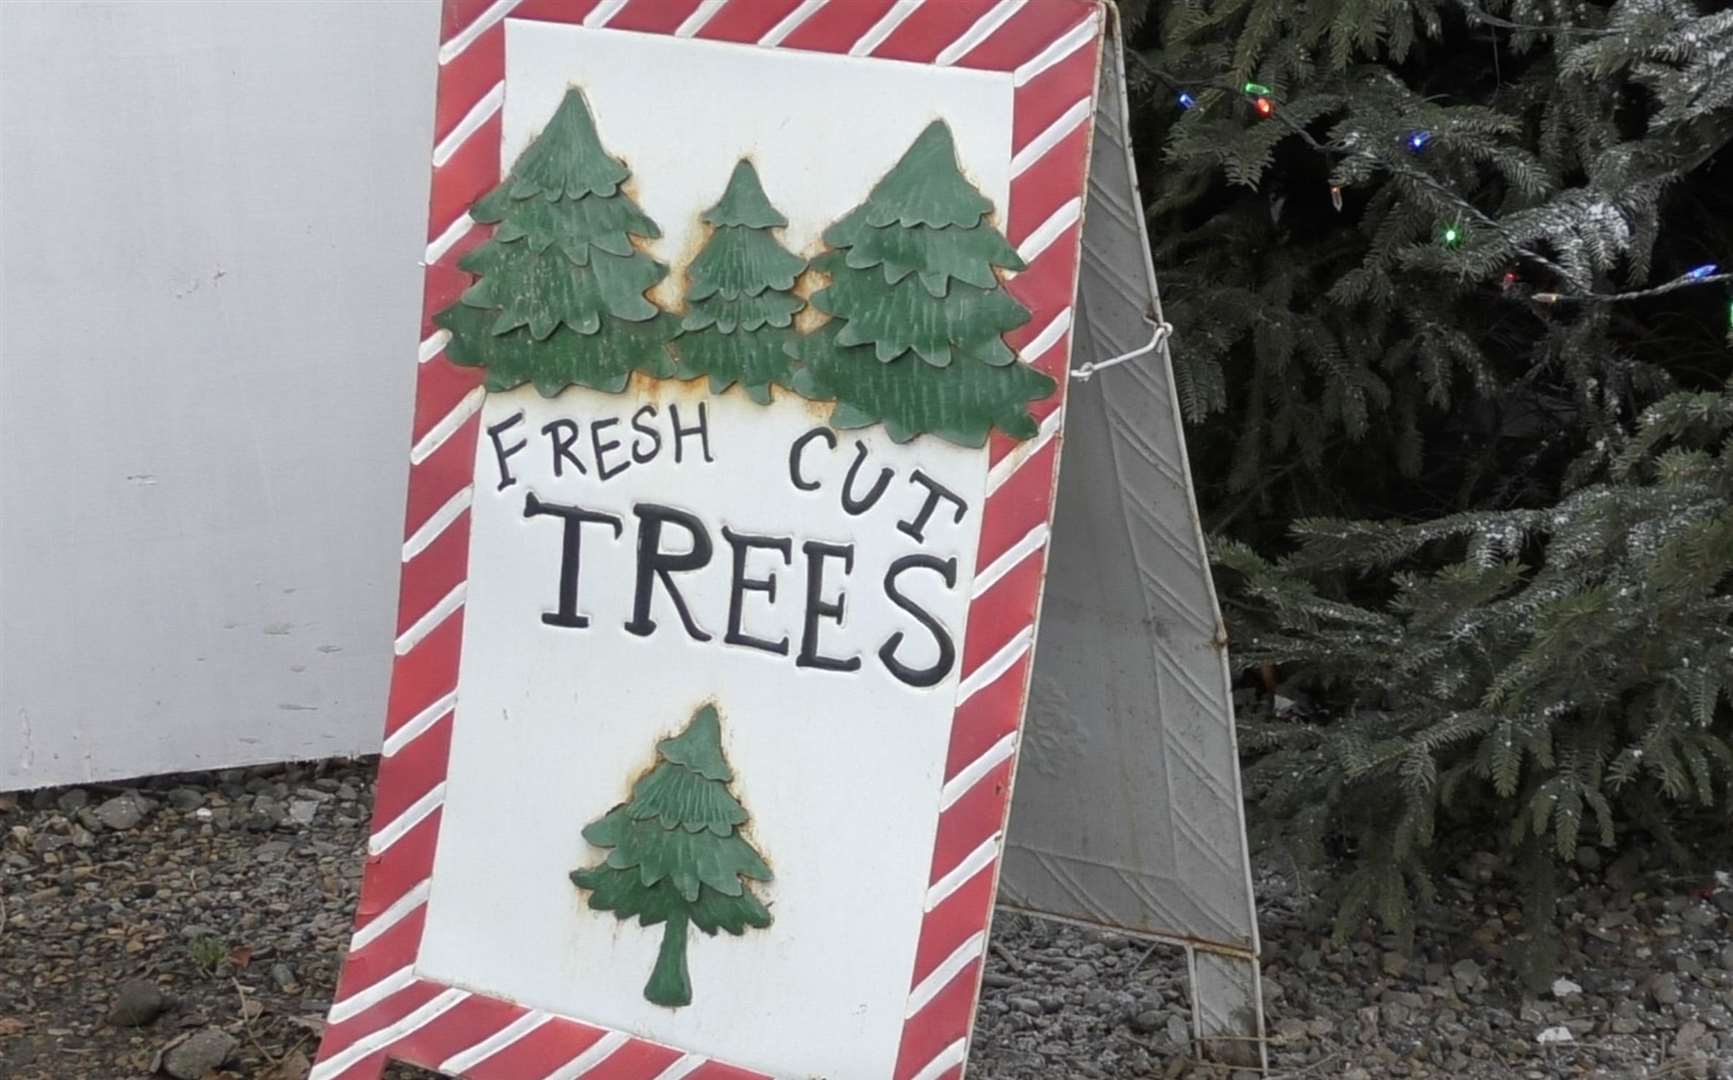 Shoppers chose real trees for the smell and nostalgia